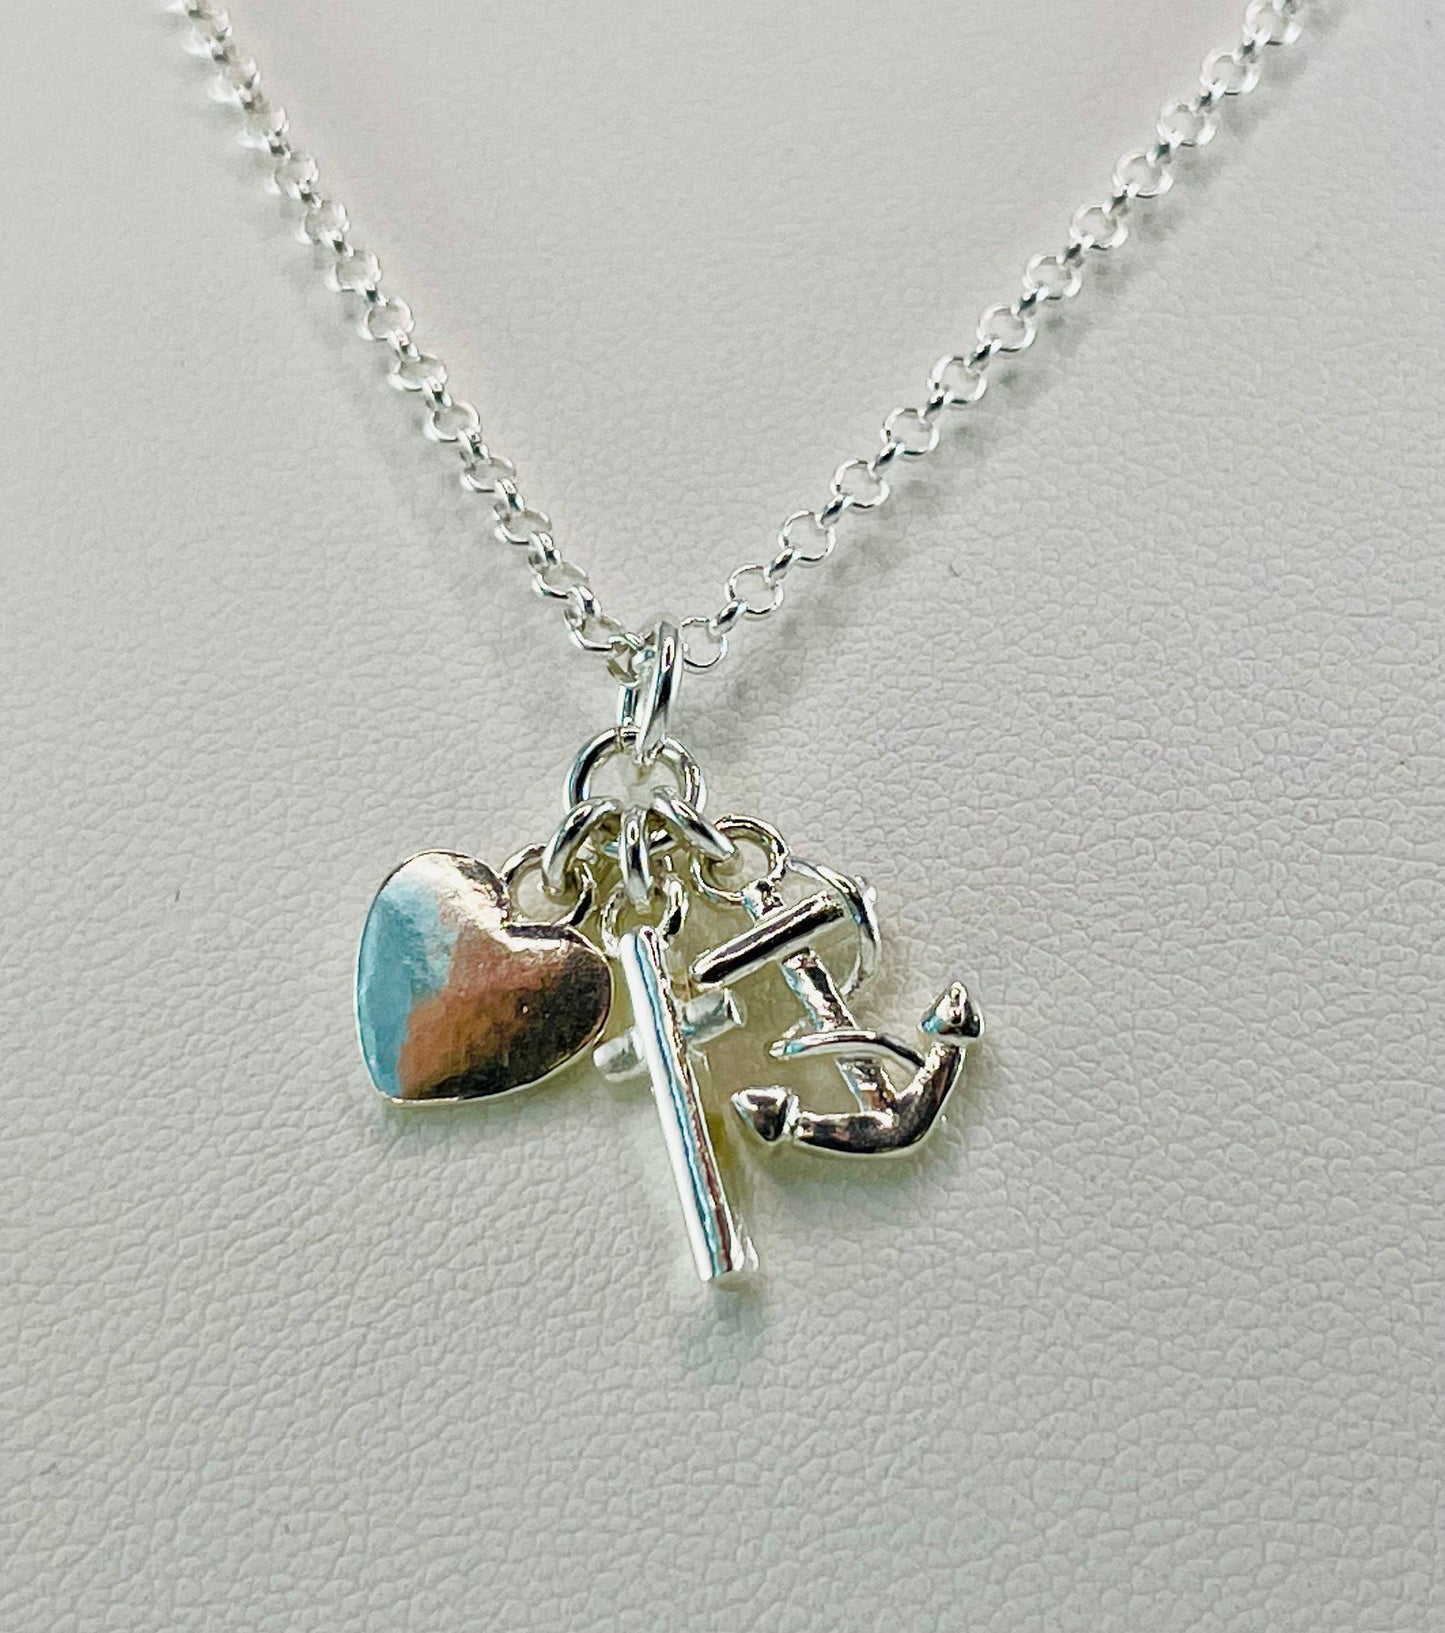 Heart Cross Anchor Necklace,Love Faith Hope Necklace,Christian Jewelry,Initial Necklace,First Communion Necklace,1 Corinthians 13